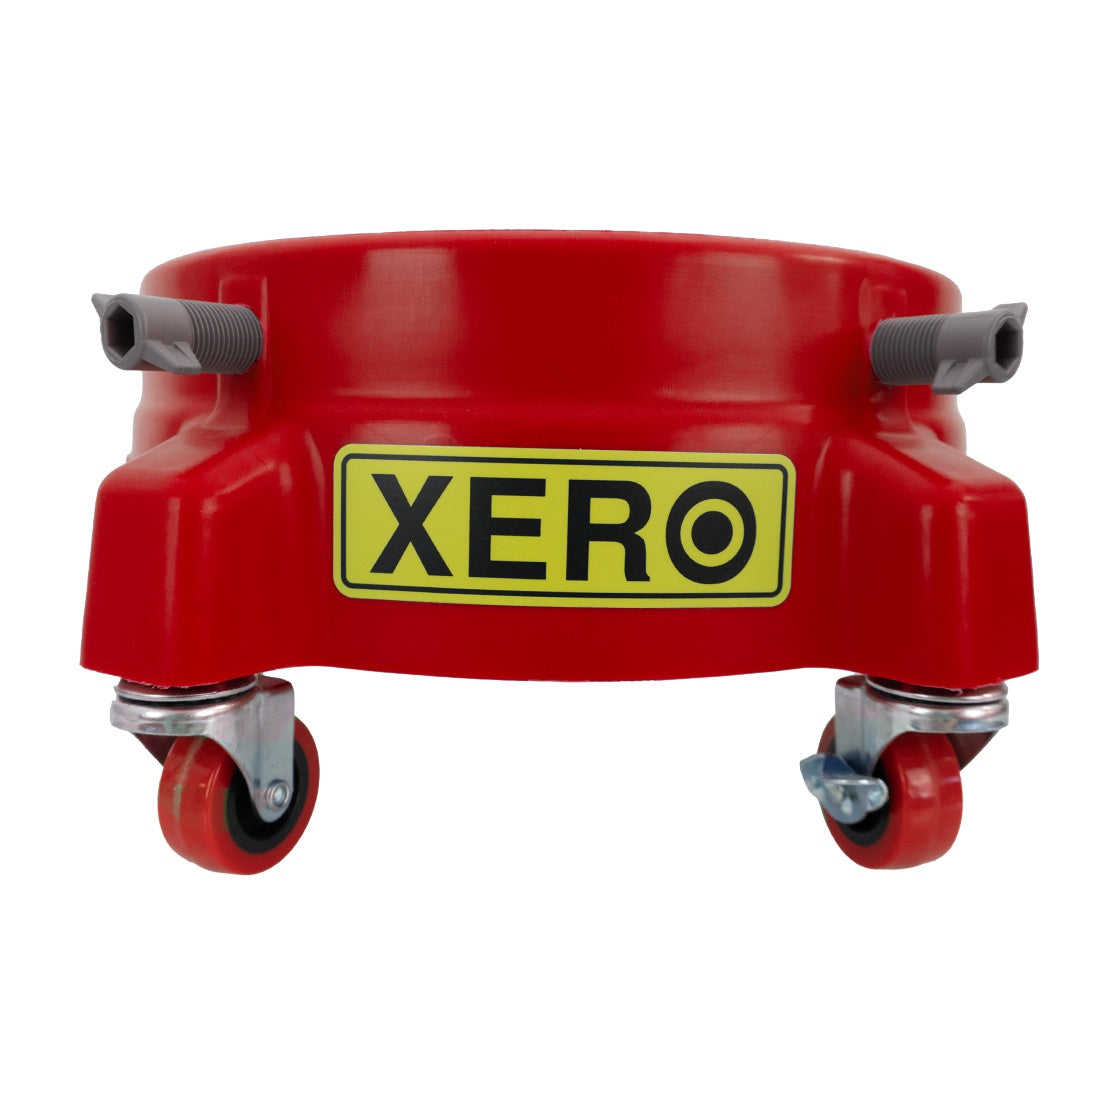 XERO Bucket Dolly with Casters Product View